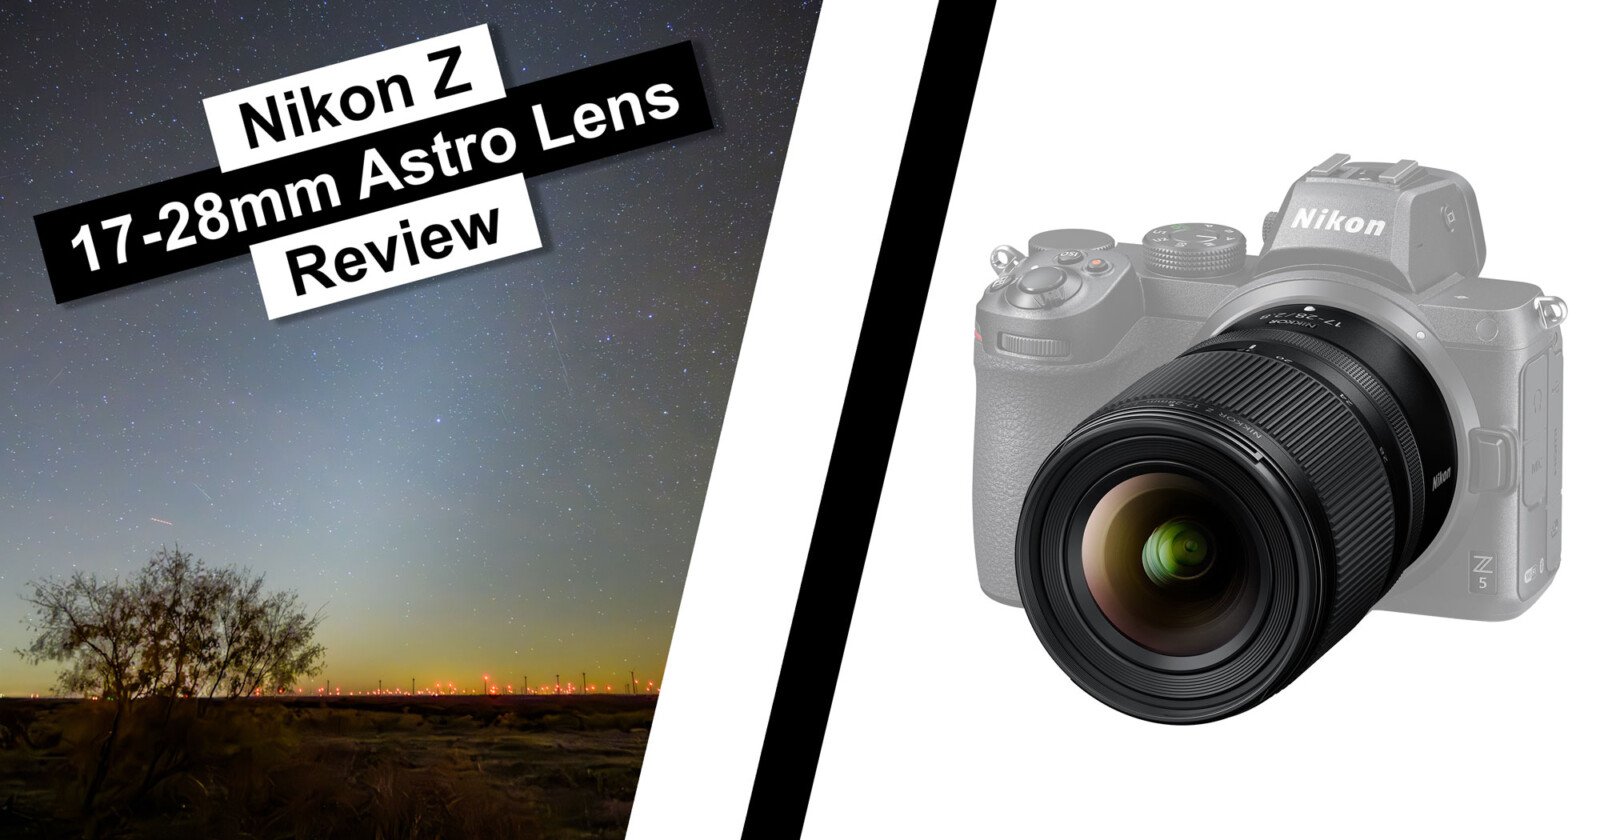 Nikon Z 17-28mm f/2.8 Nightscape and Astrophotography Review